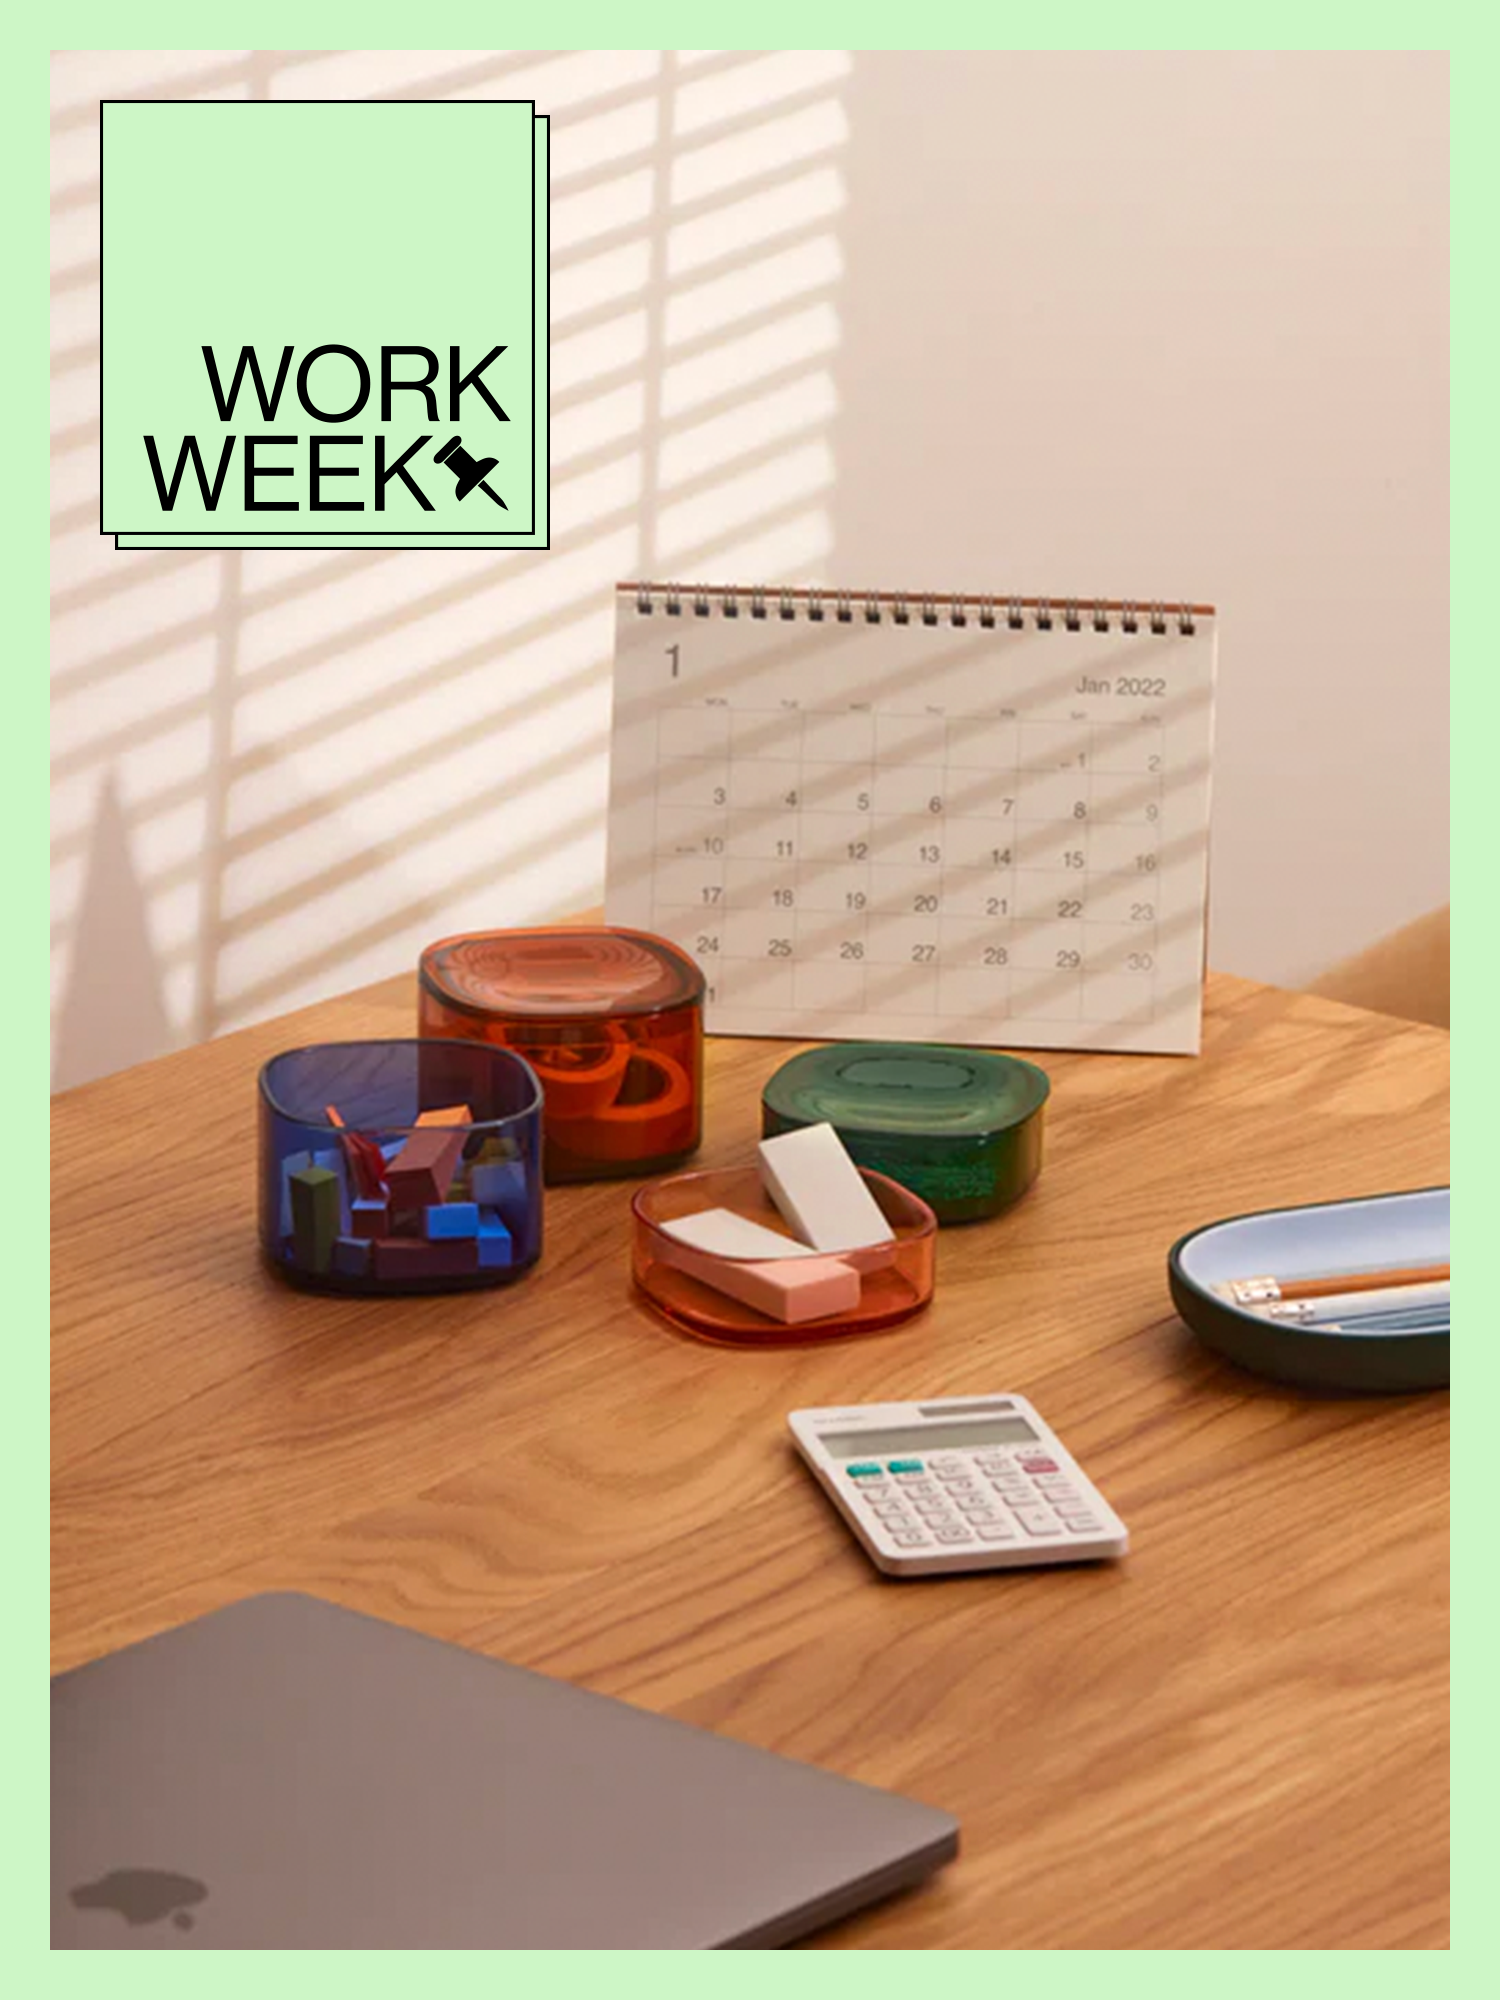 Open Spaces multi-color Storage Gems on walnut-wood desk with green Work Week design border and badge.